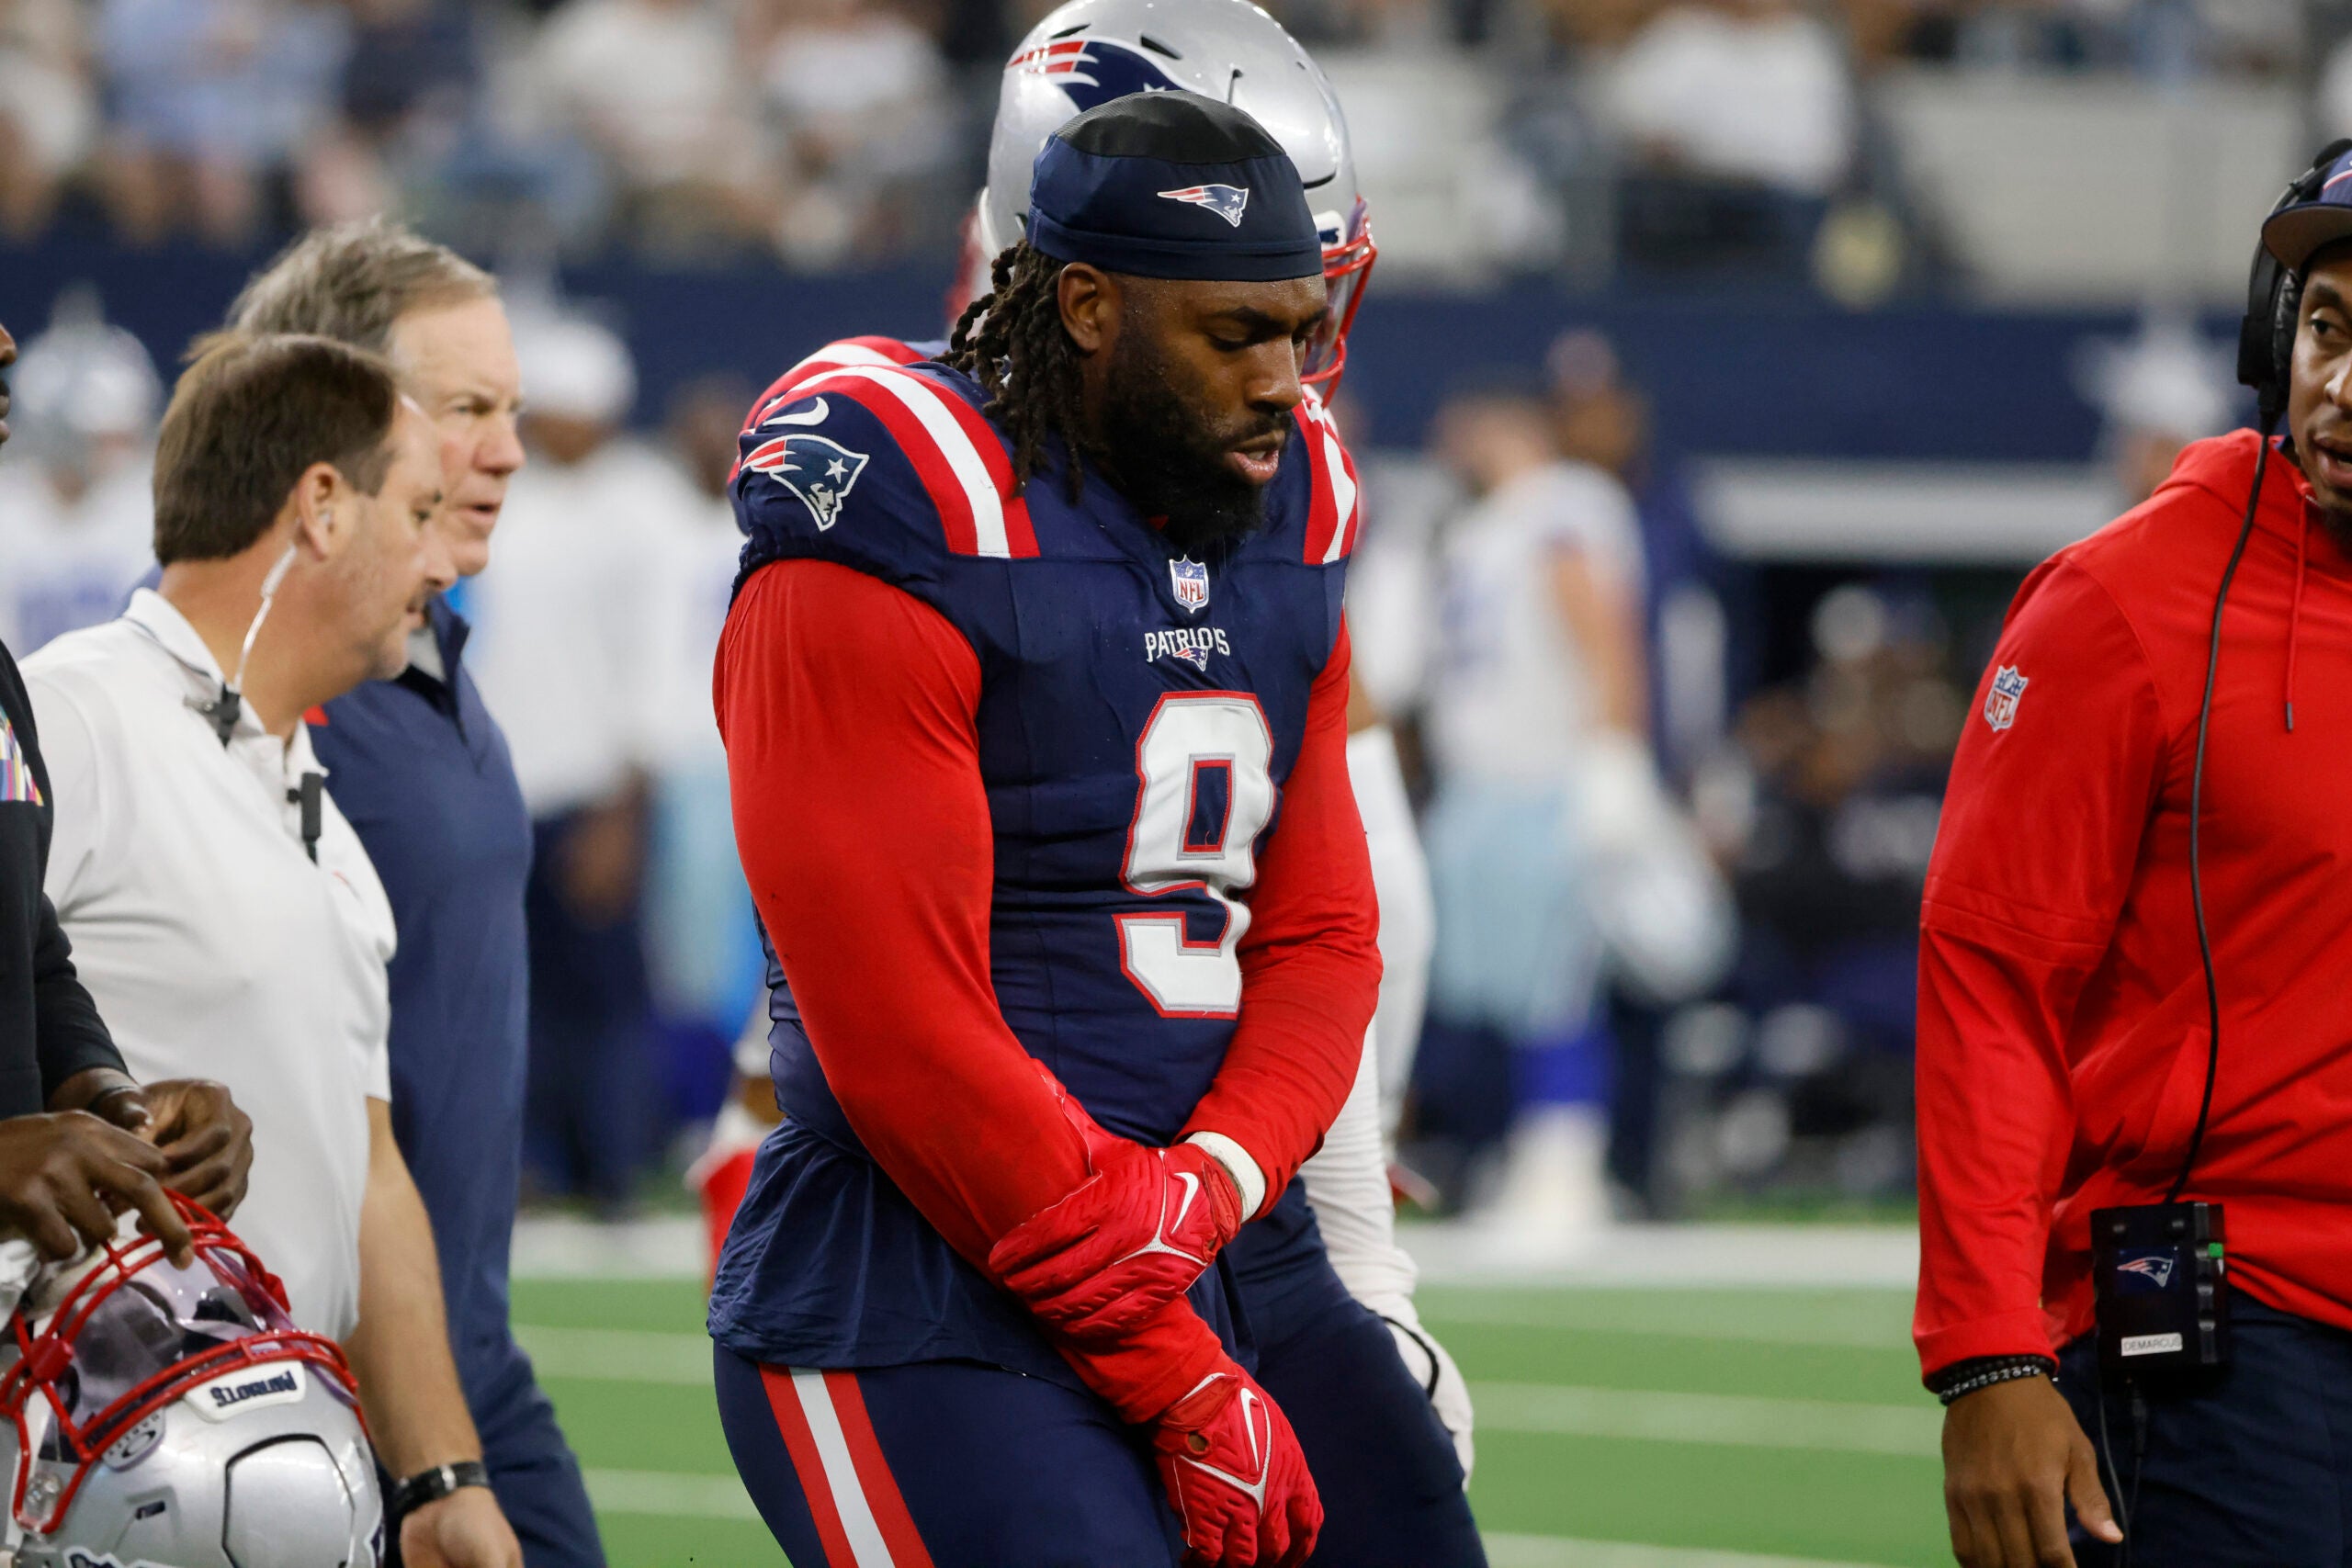 New England Patriots linebacker Matthew Judon (9) walks off the field after an injury against the Dallas Cowboys during an NFL Football game in Arlington, Texas, Sunday, Nov. 1, 2023.